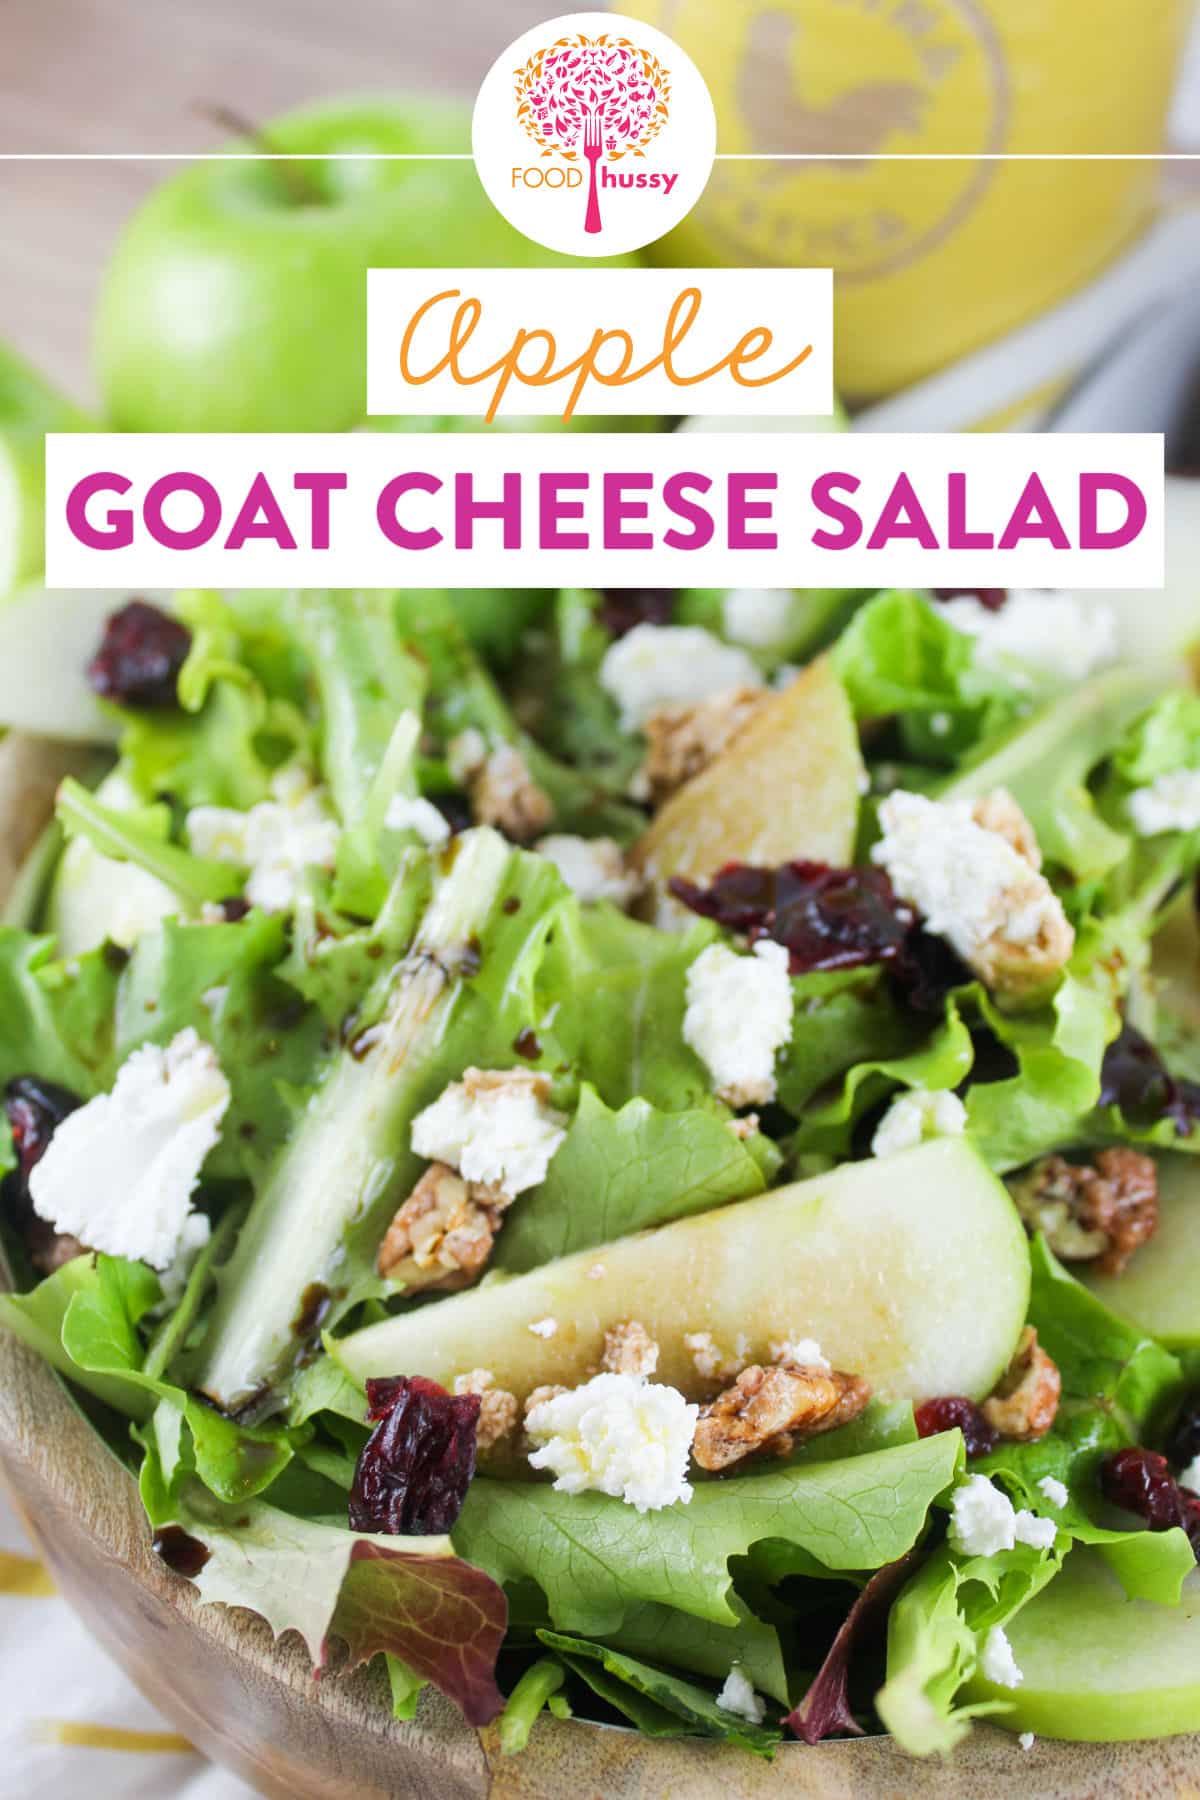 Apple Goat Cheese Salad is my favorite side salad for nearly any meal. The crunchy tart green apple is so great with that creamy goat cheese. Plus if you add a grilled chicken breast - you've got a whole meal.
 via @foodhussy